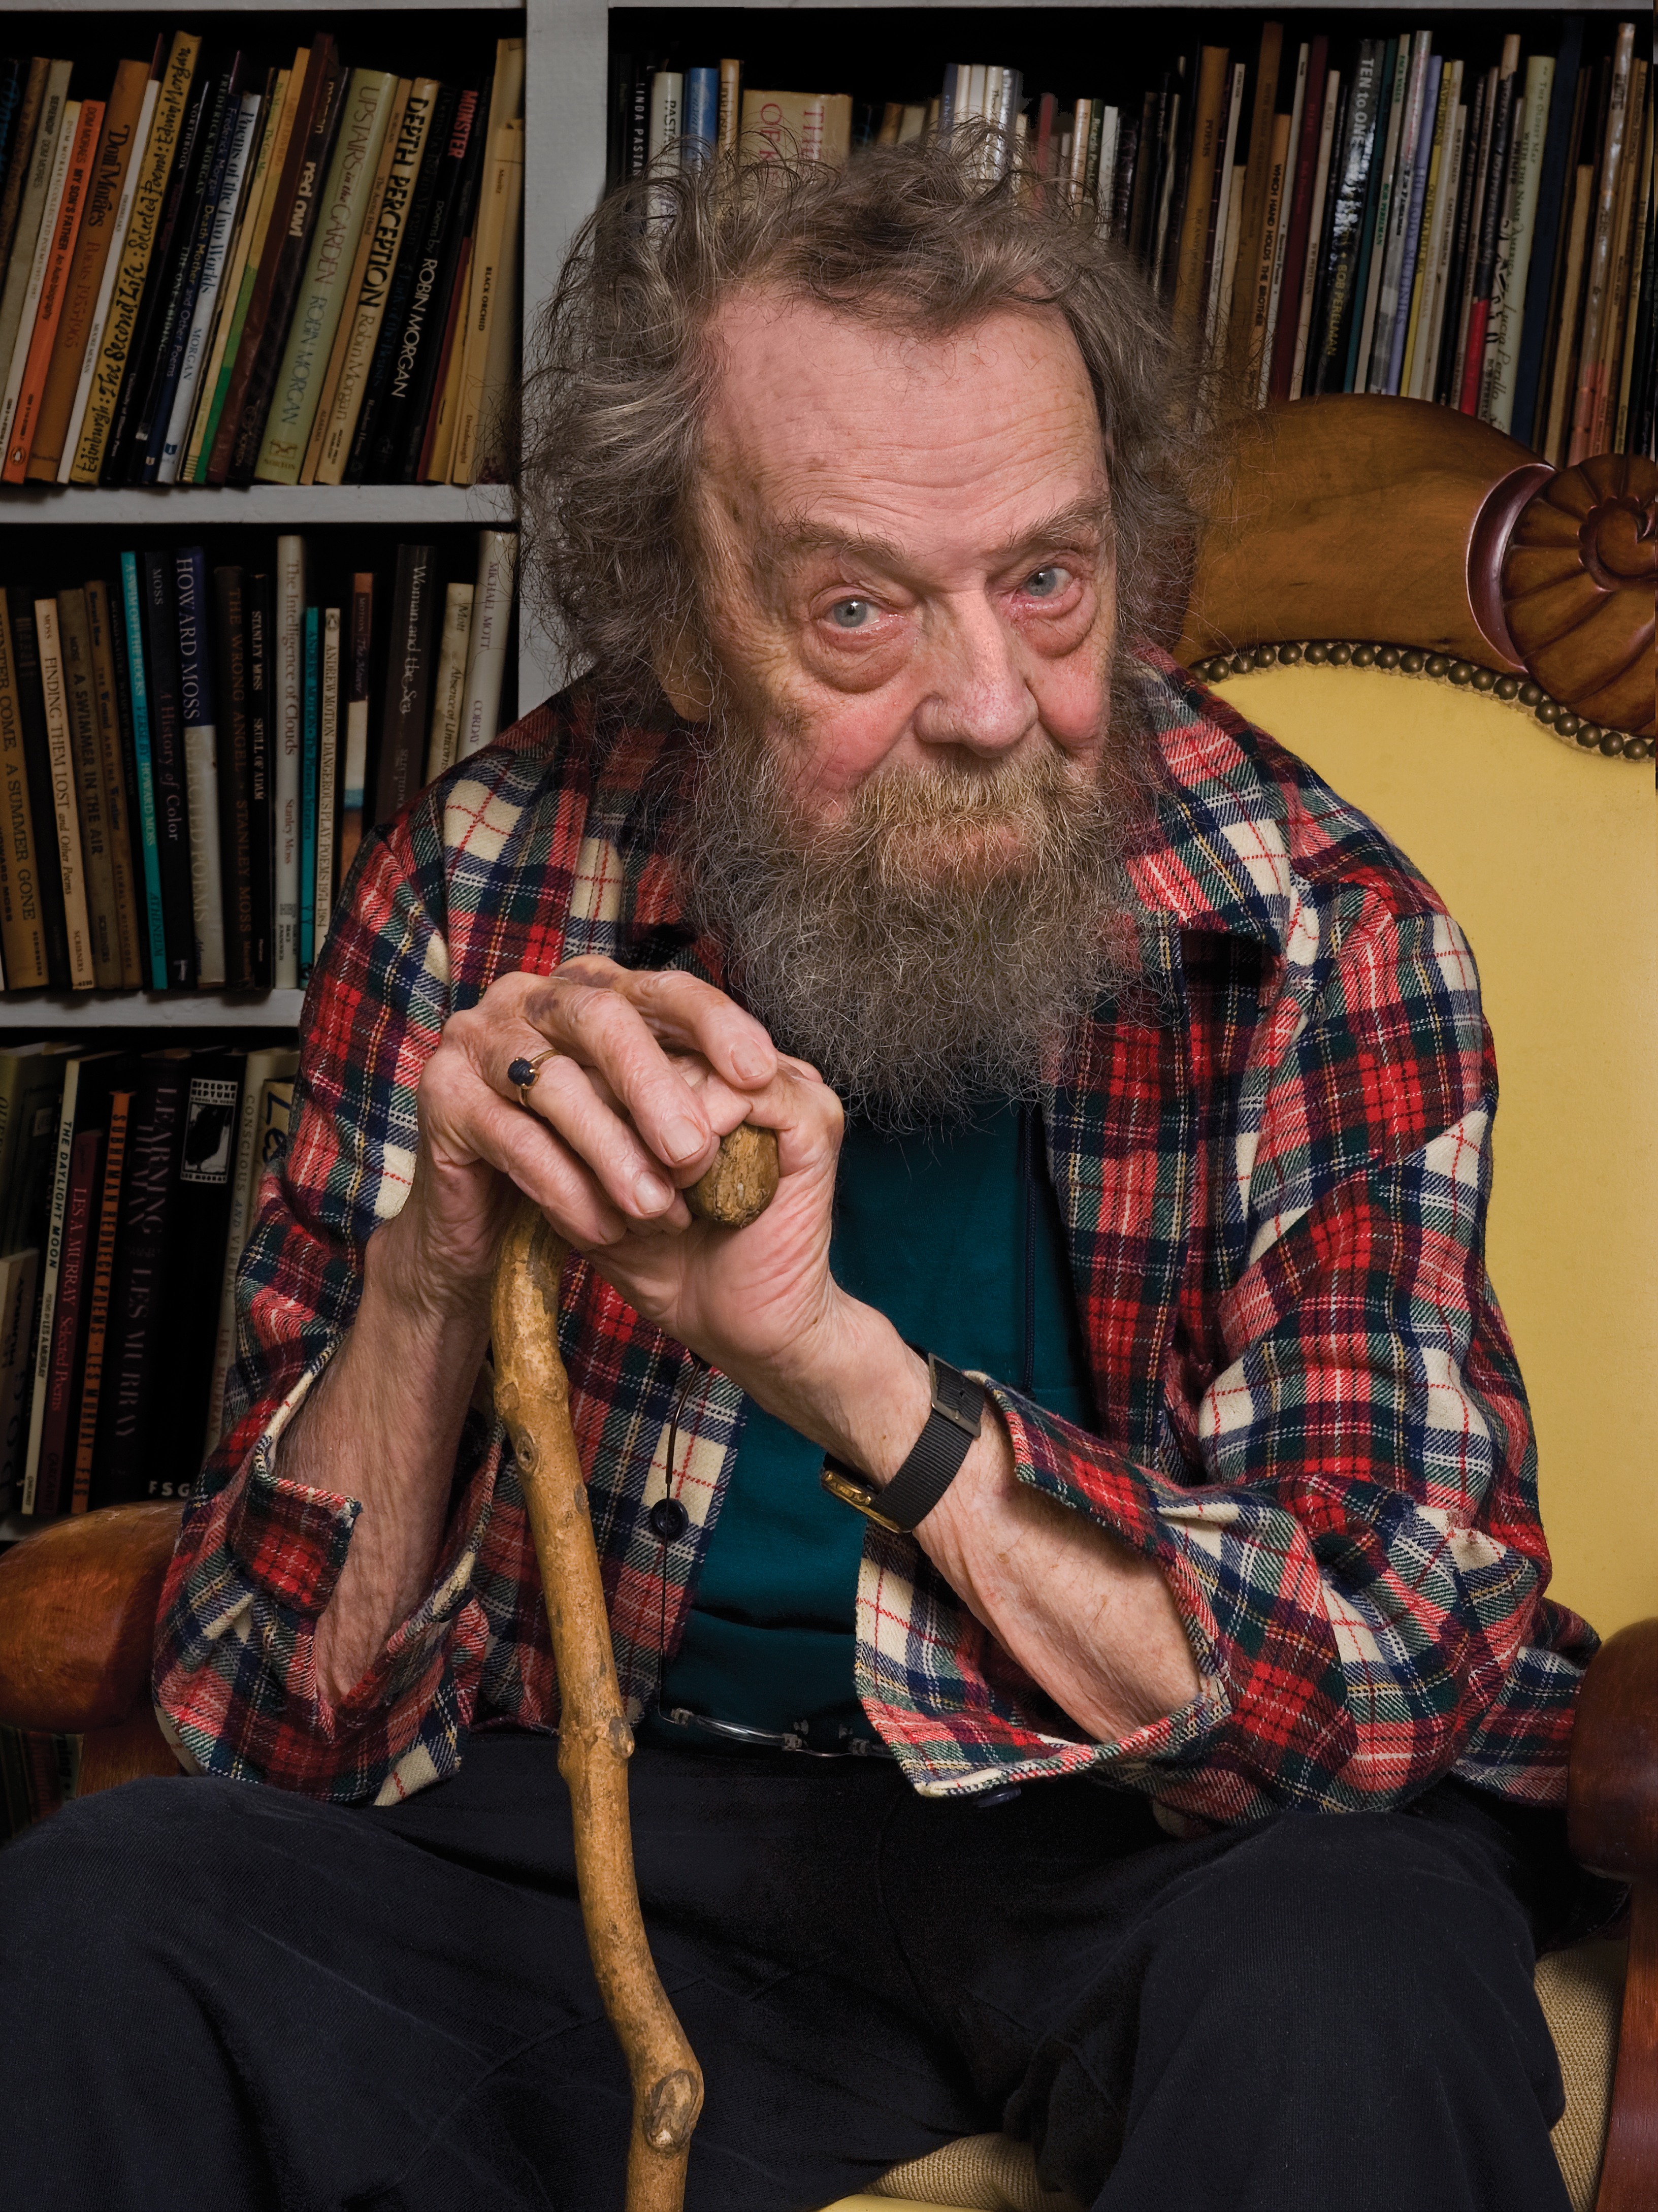 Fleeting: In Memory of Donald Hall